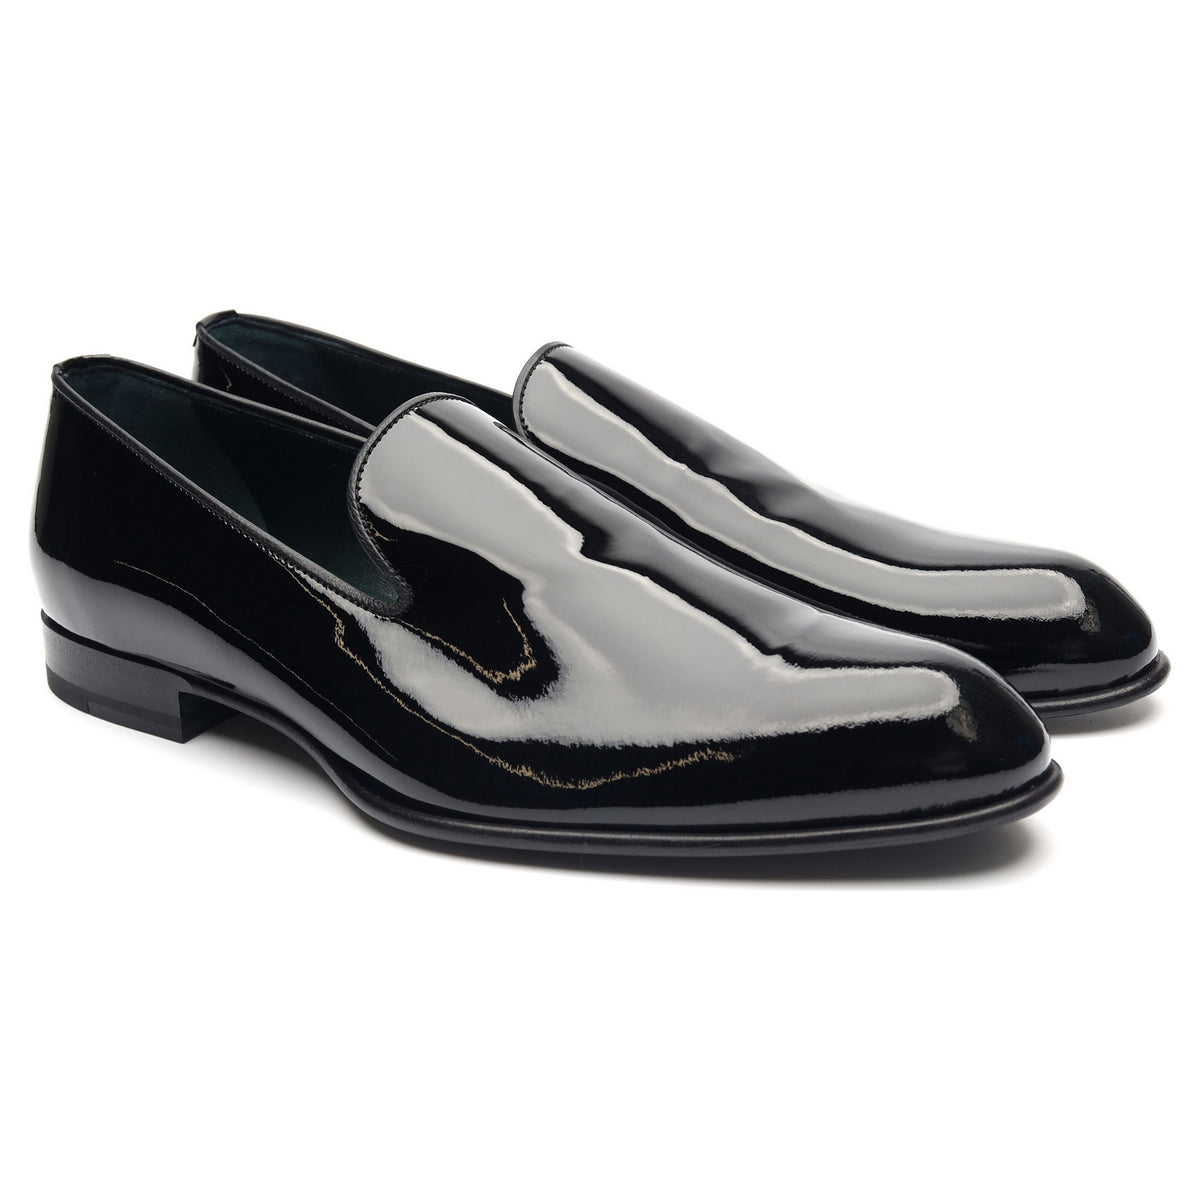 Black Patent Leather Evening Loafers UK 8